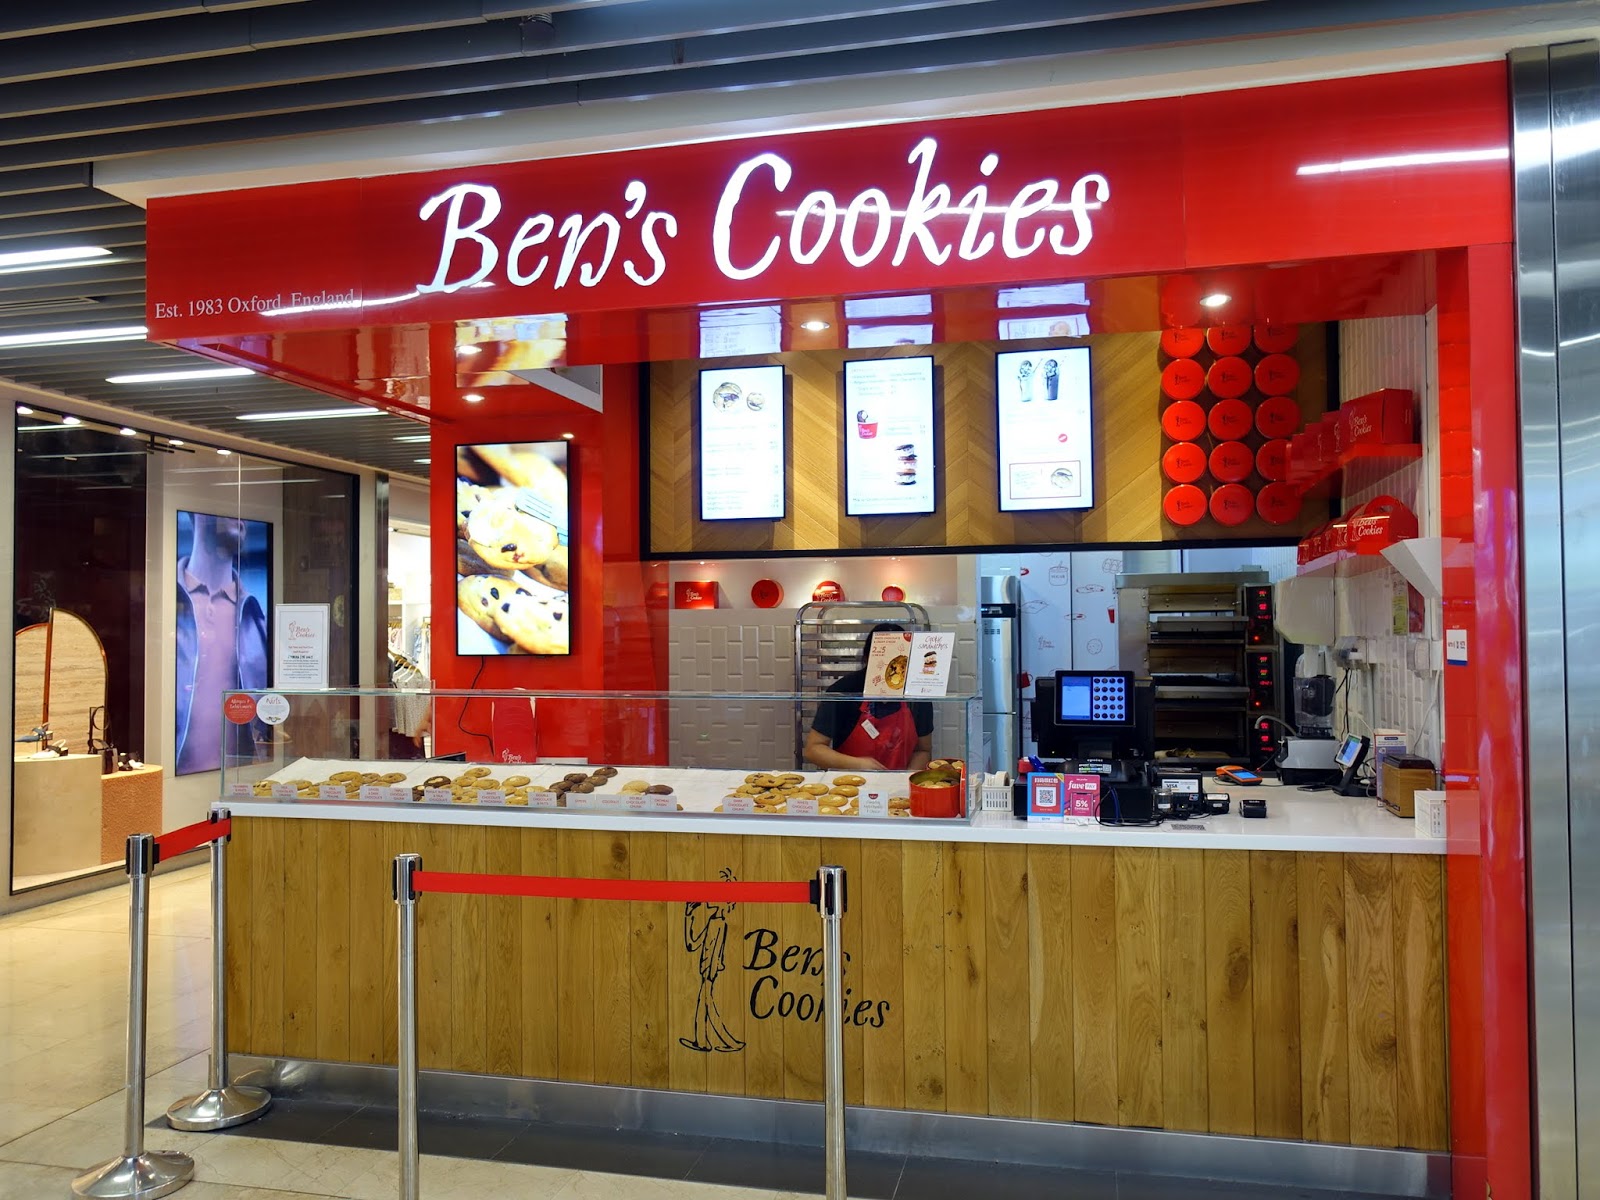 Bens Cookies menu prices featuring 8 items ranging from £9.70 to £21.00